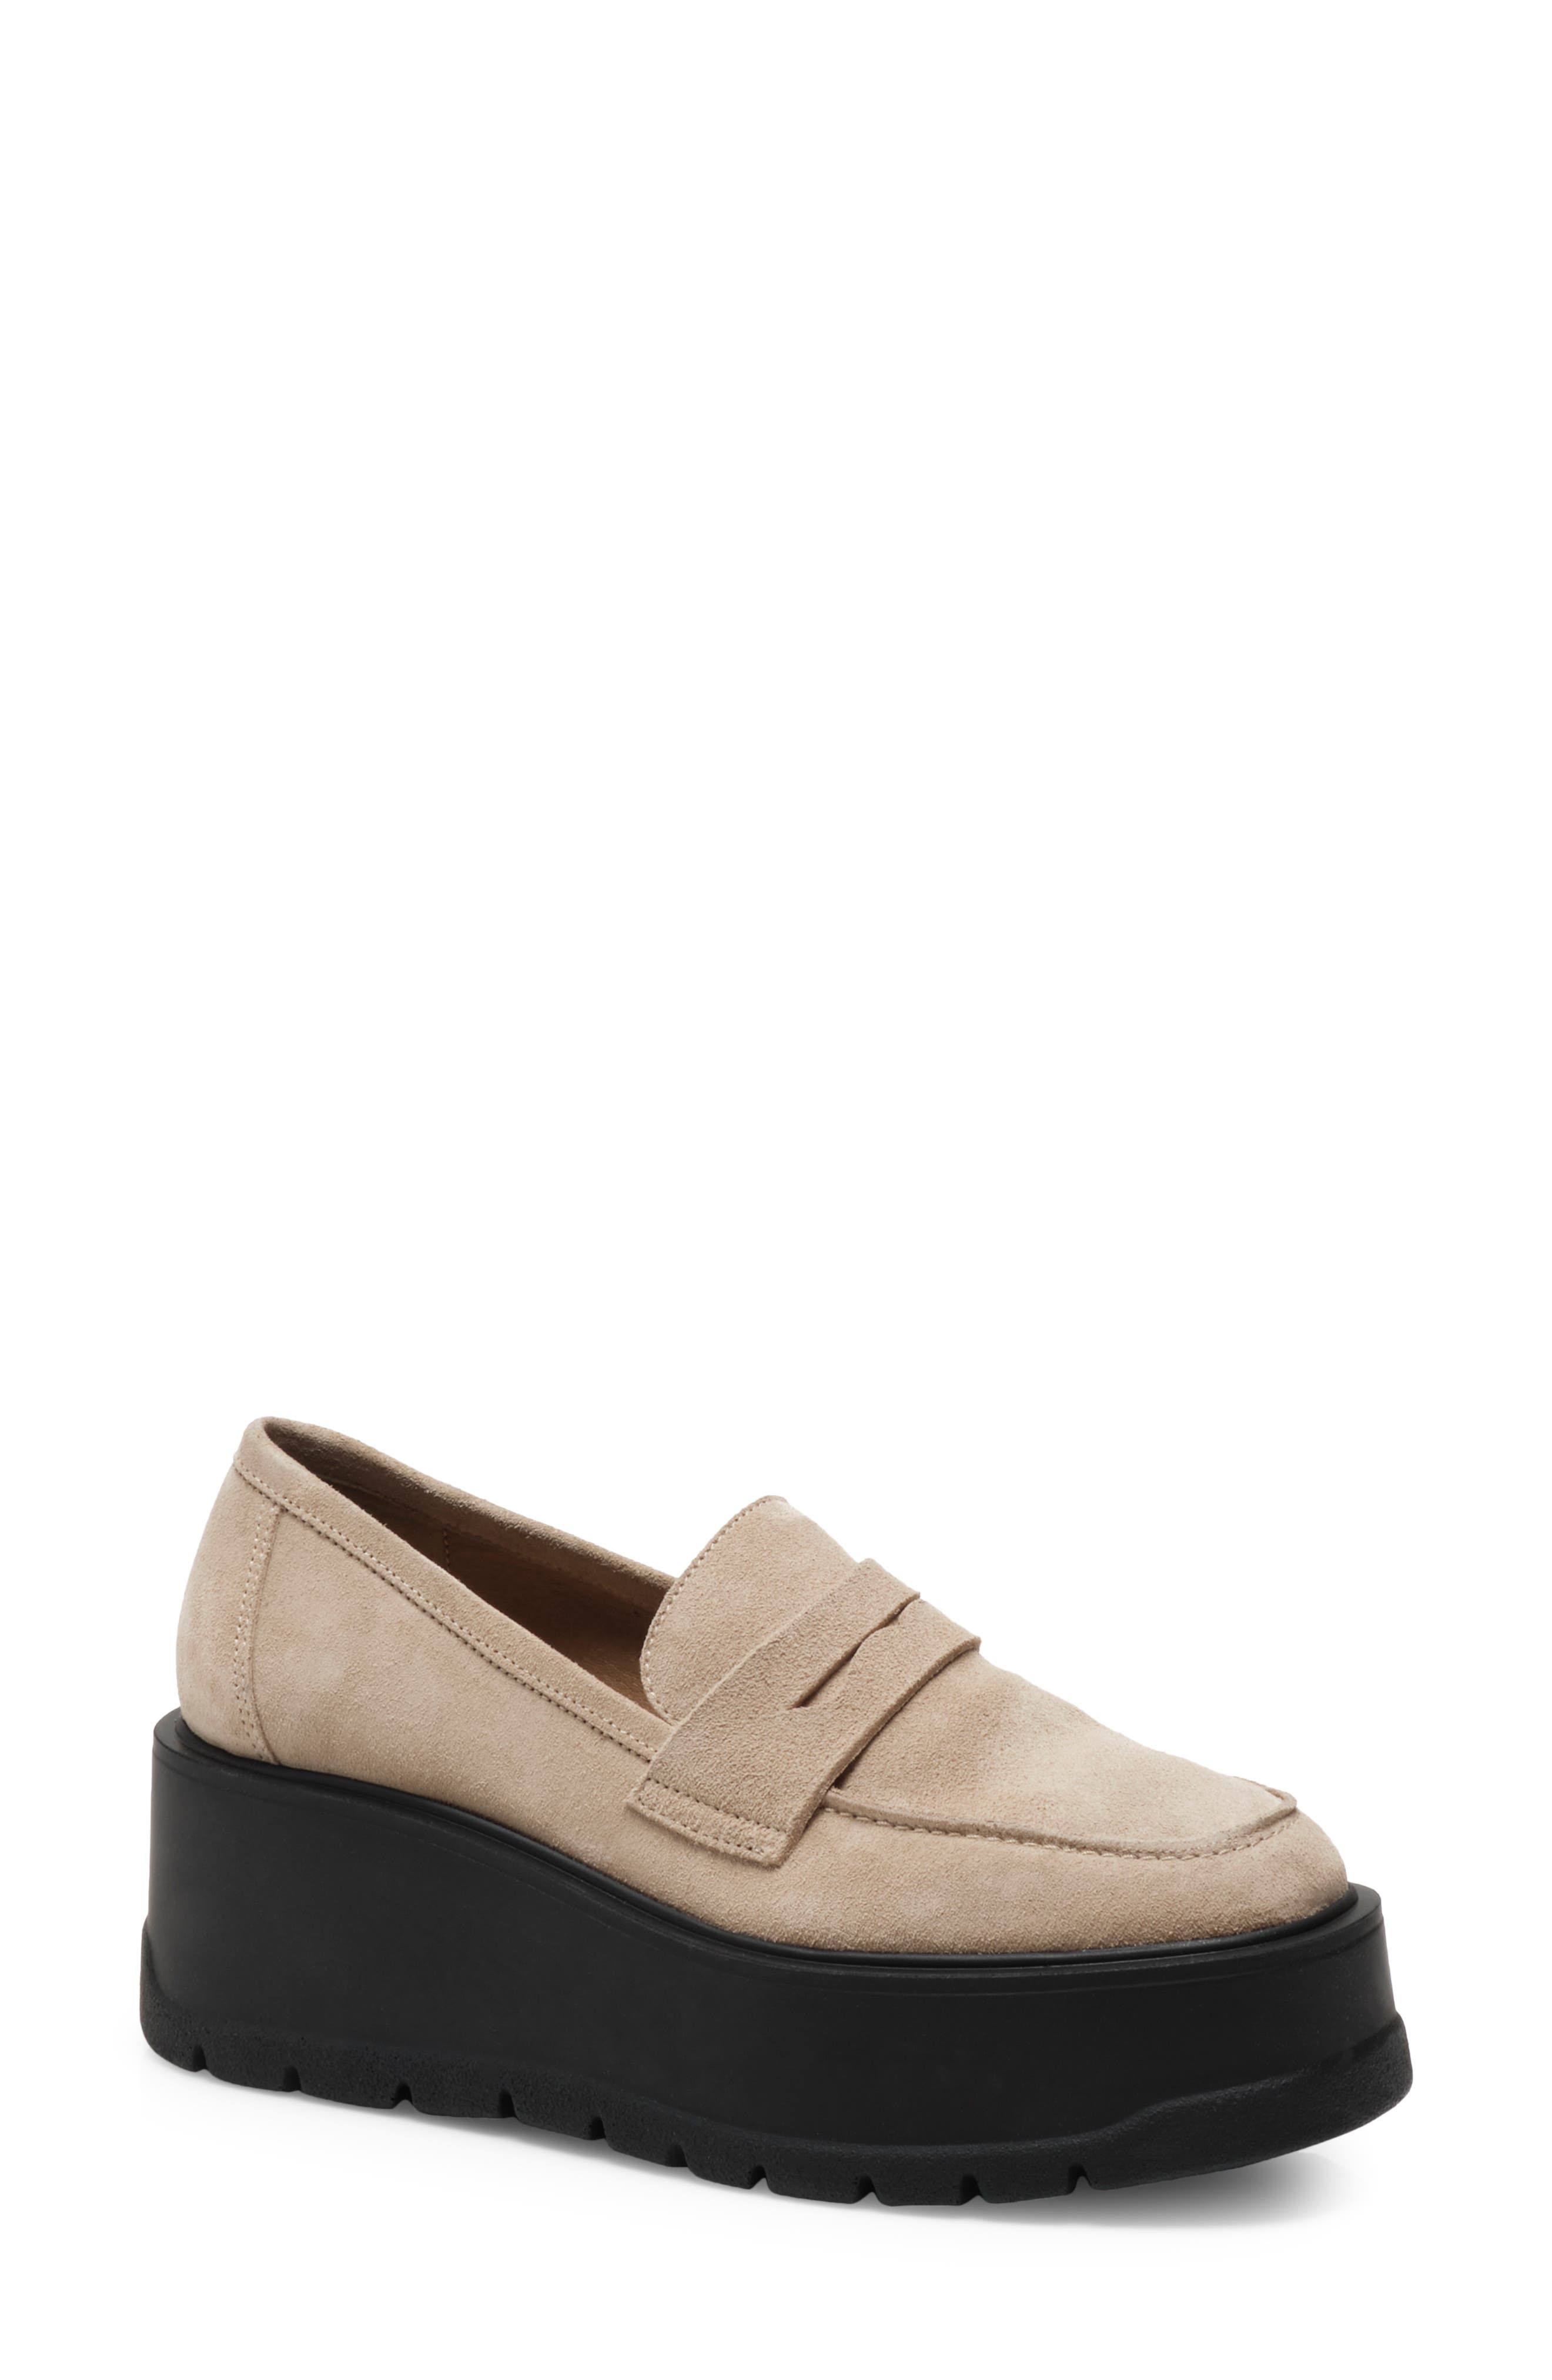 Free People Suede Nico Platform Loafer in Taupe Womens Shoes Flats and flat shoes Loafers and moccasins Black 